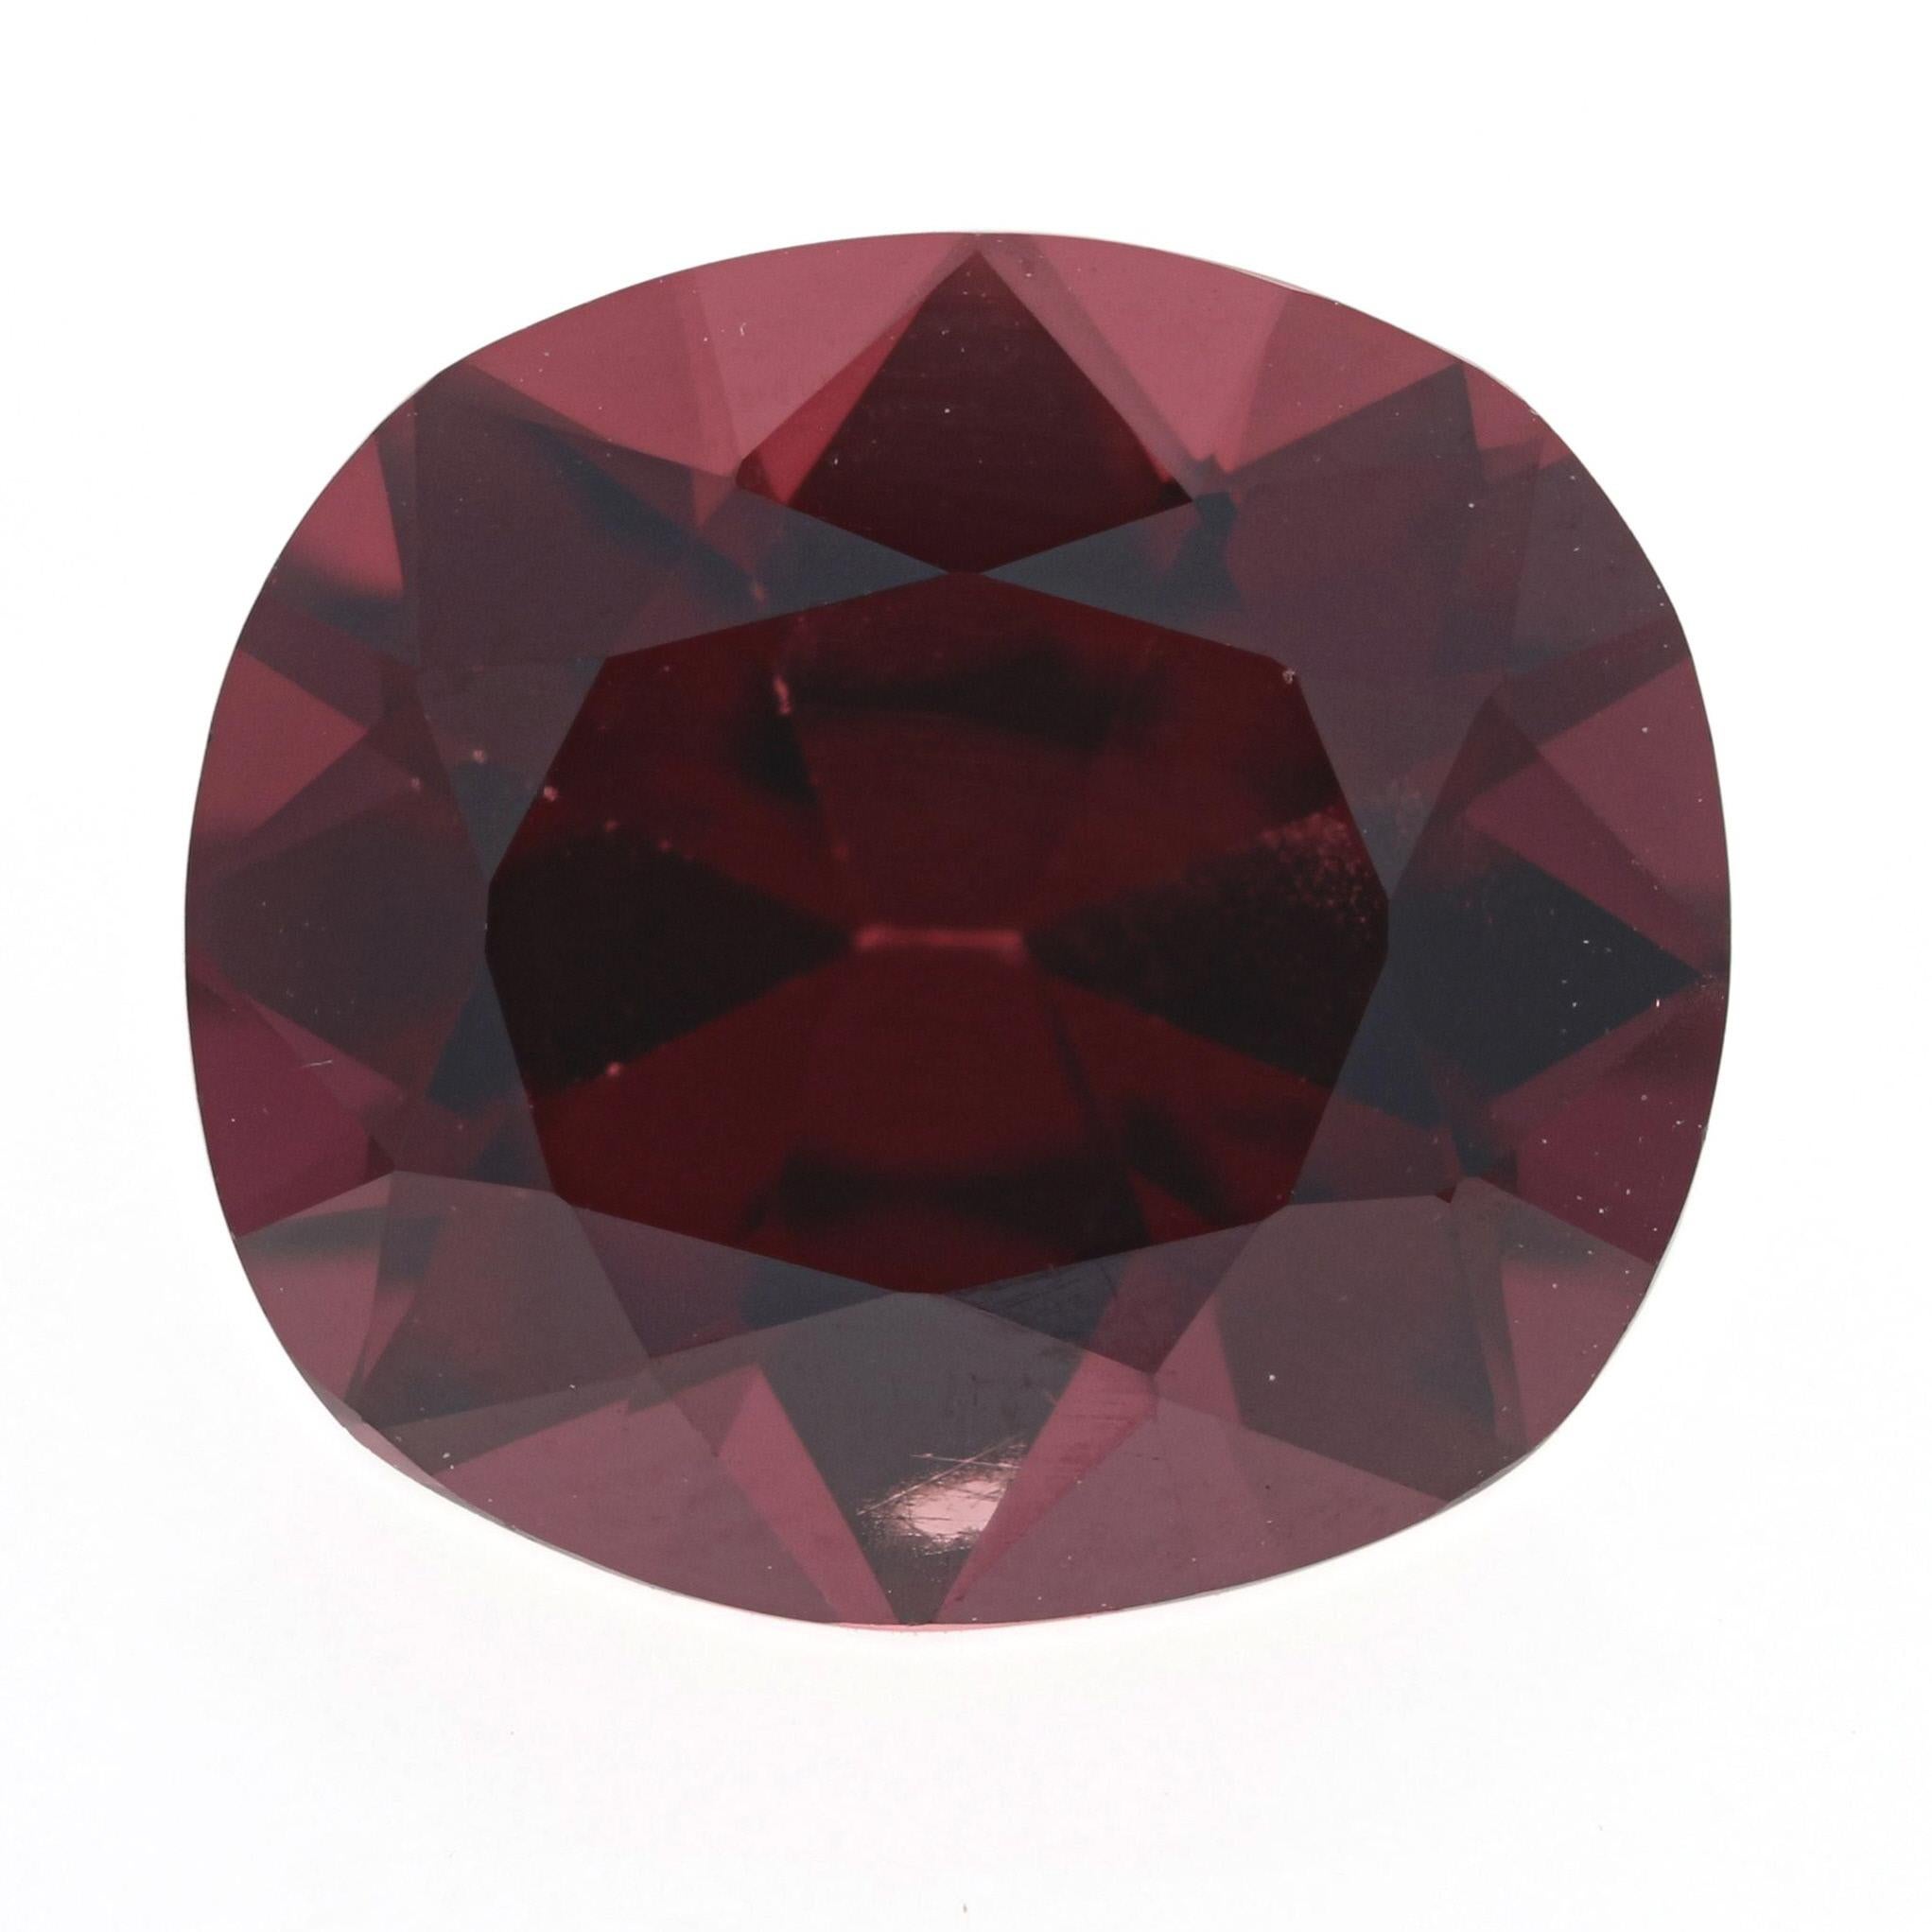 Weight: 5.04ct
Cut: Cushion 
Color: Red   
Dimensions (mm): 11.25 x 10.18 x 6.66 

Condition: New  

Please check out the enlarged pictures.

Thank you for taking the time to read our description. If you have any questions, please do not hesitate to